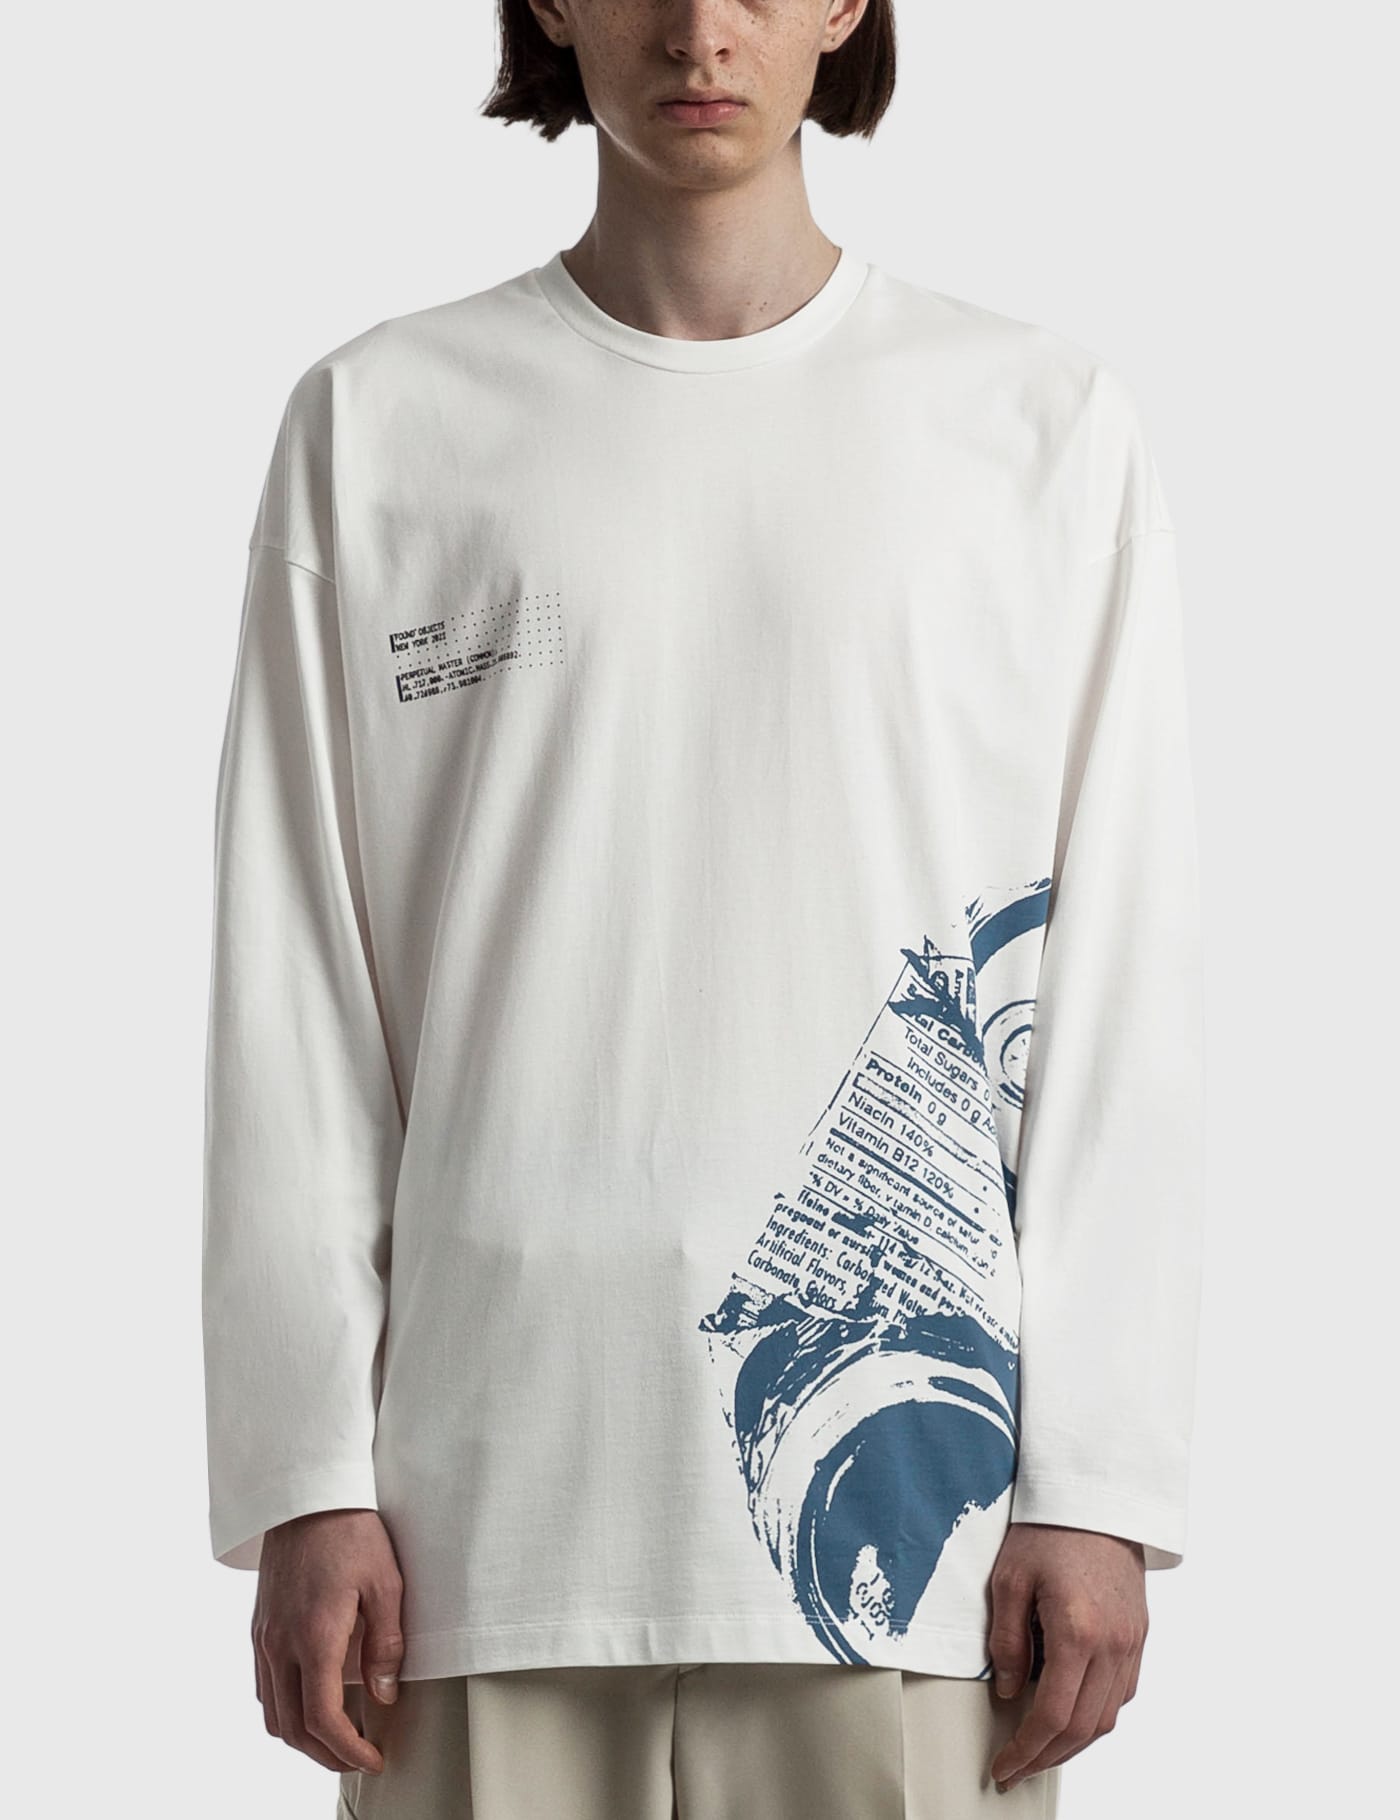 OAMC - Crush T-shirt | HBX - Globally Curated Fashion and